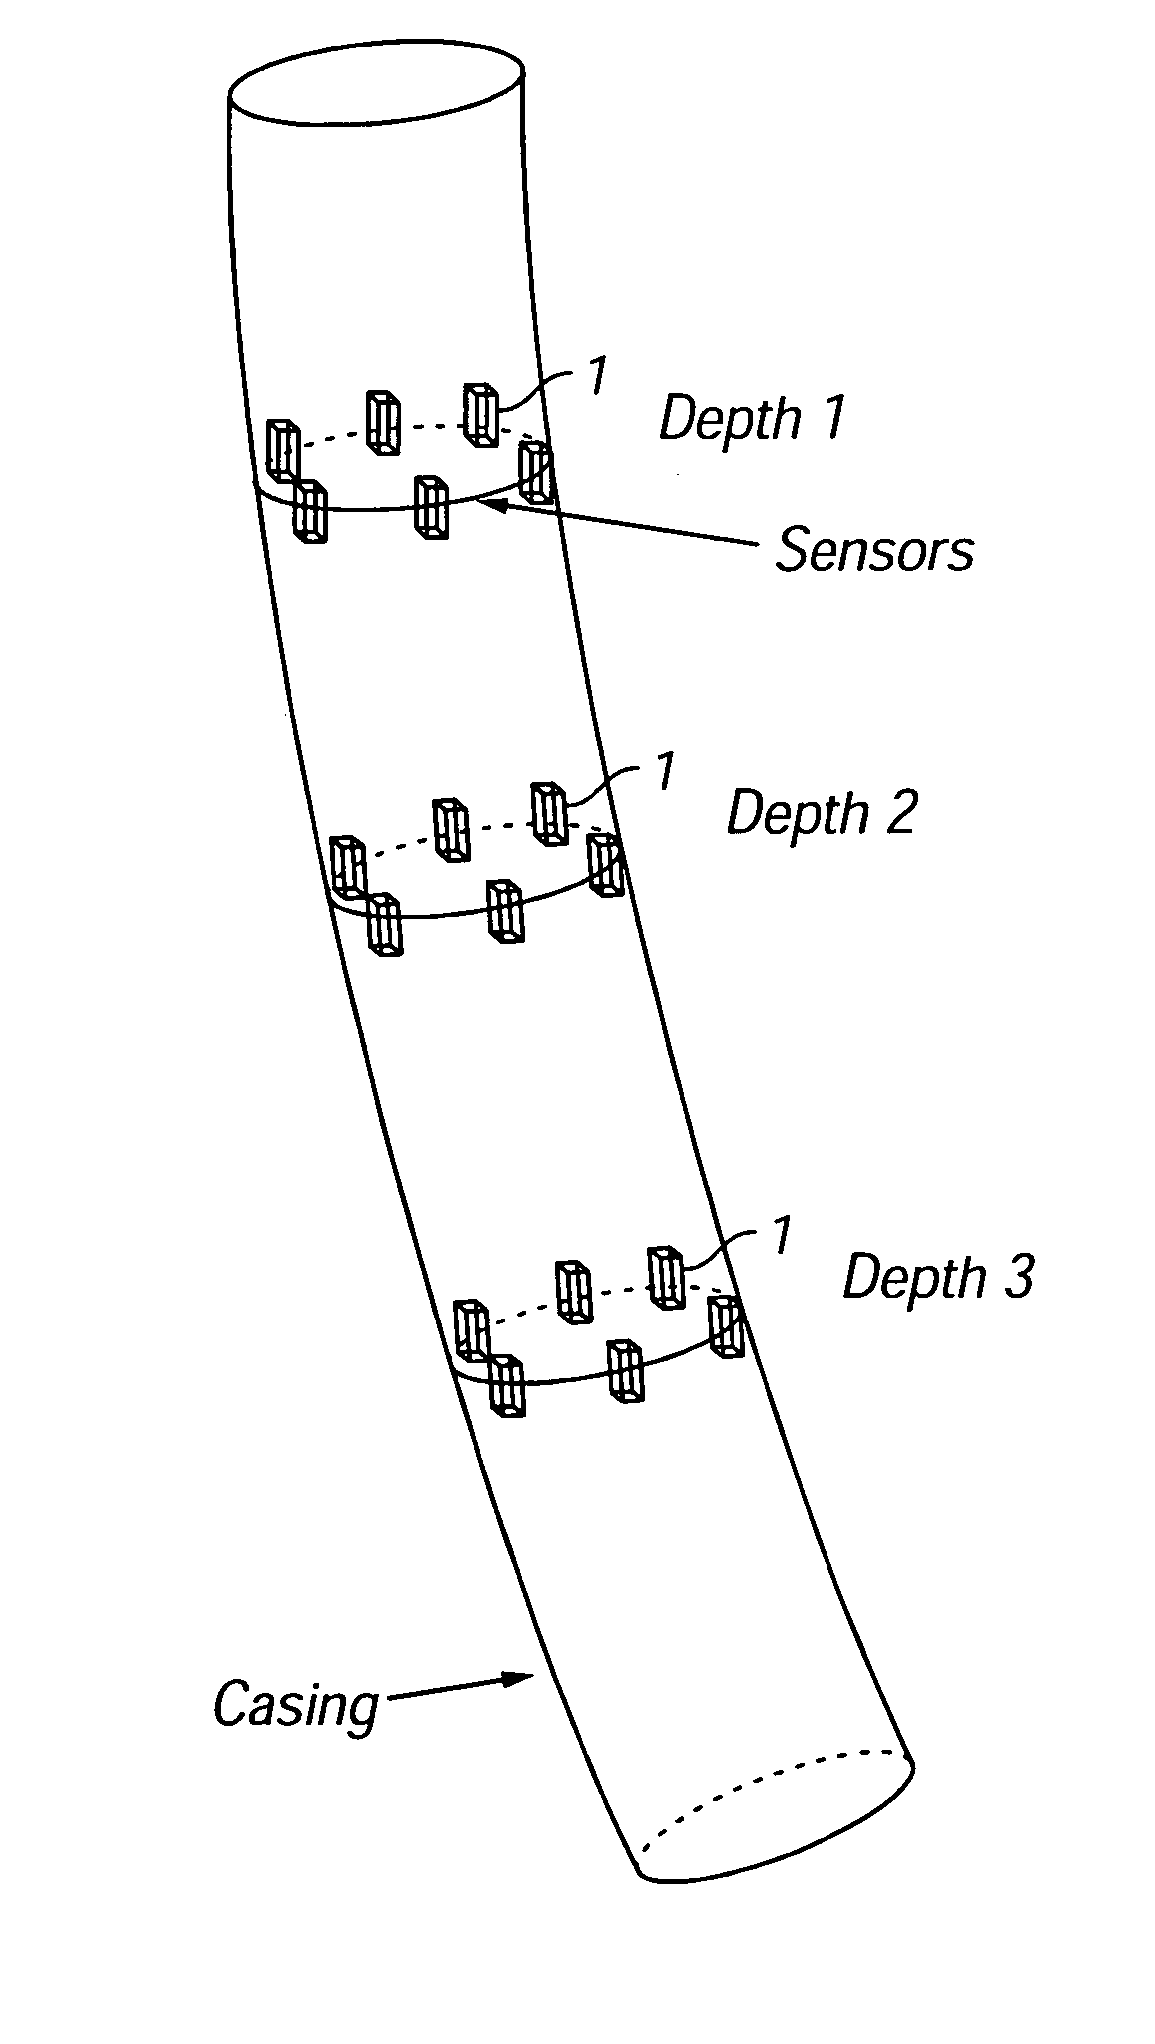 Method for stress and stability related measurements in boreholes